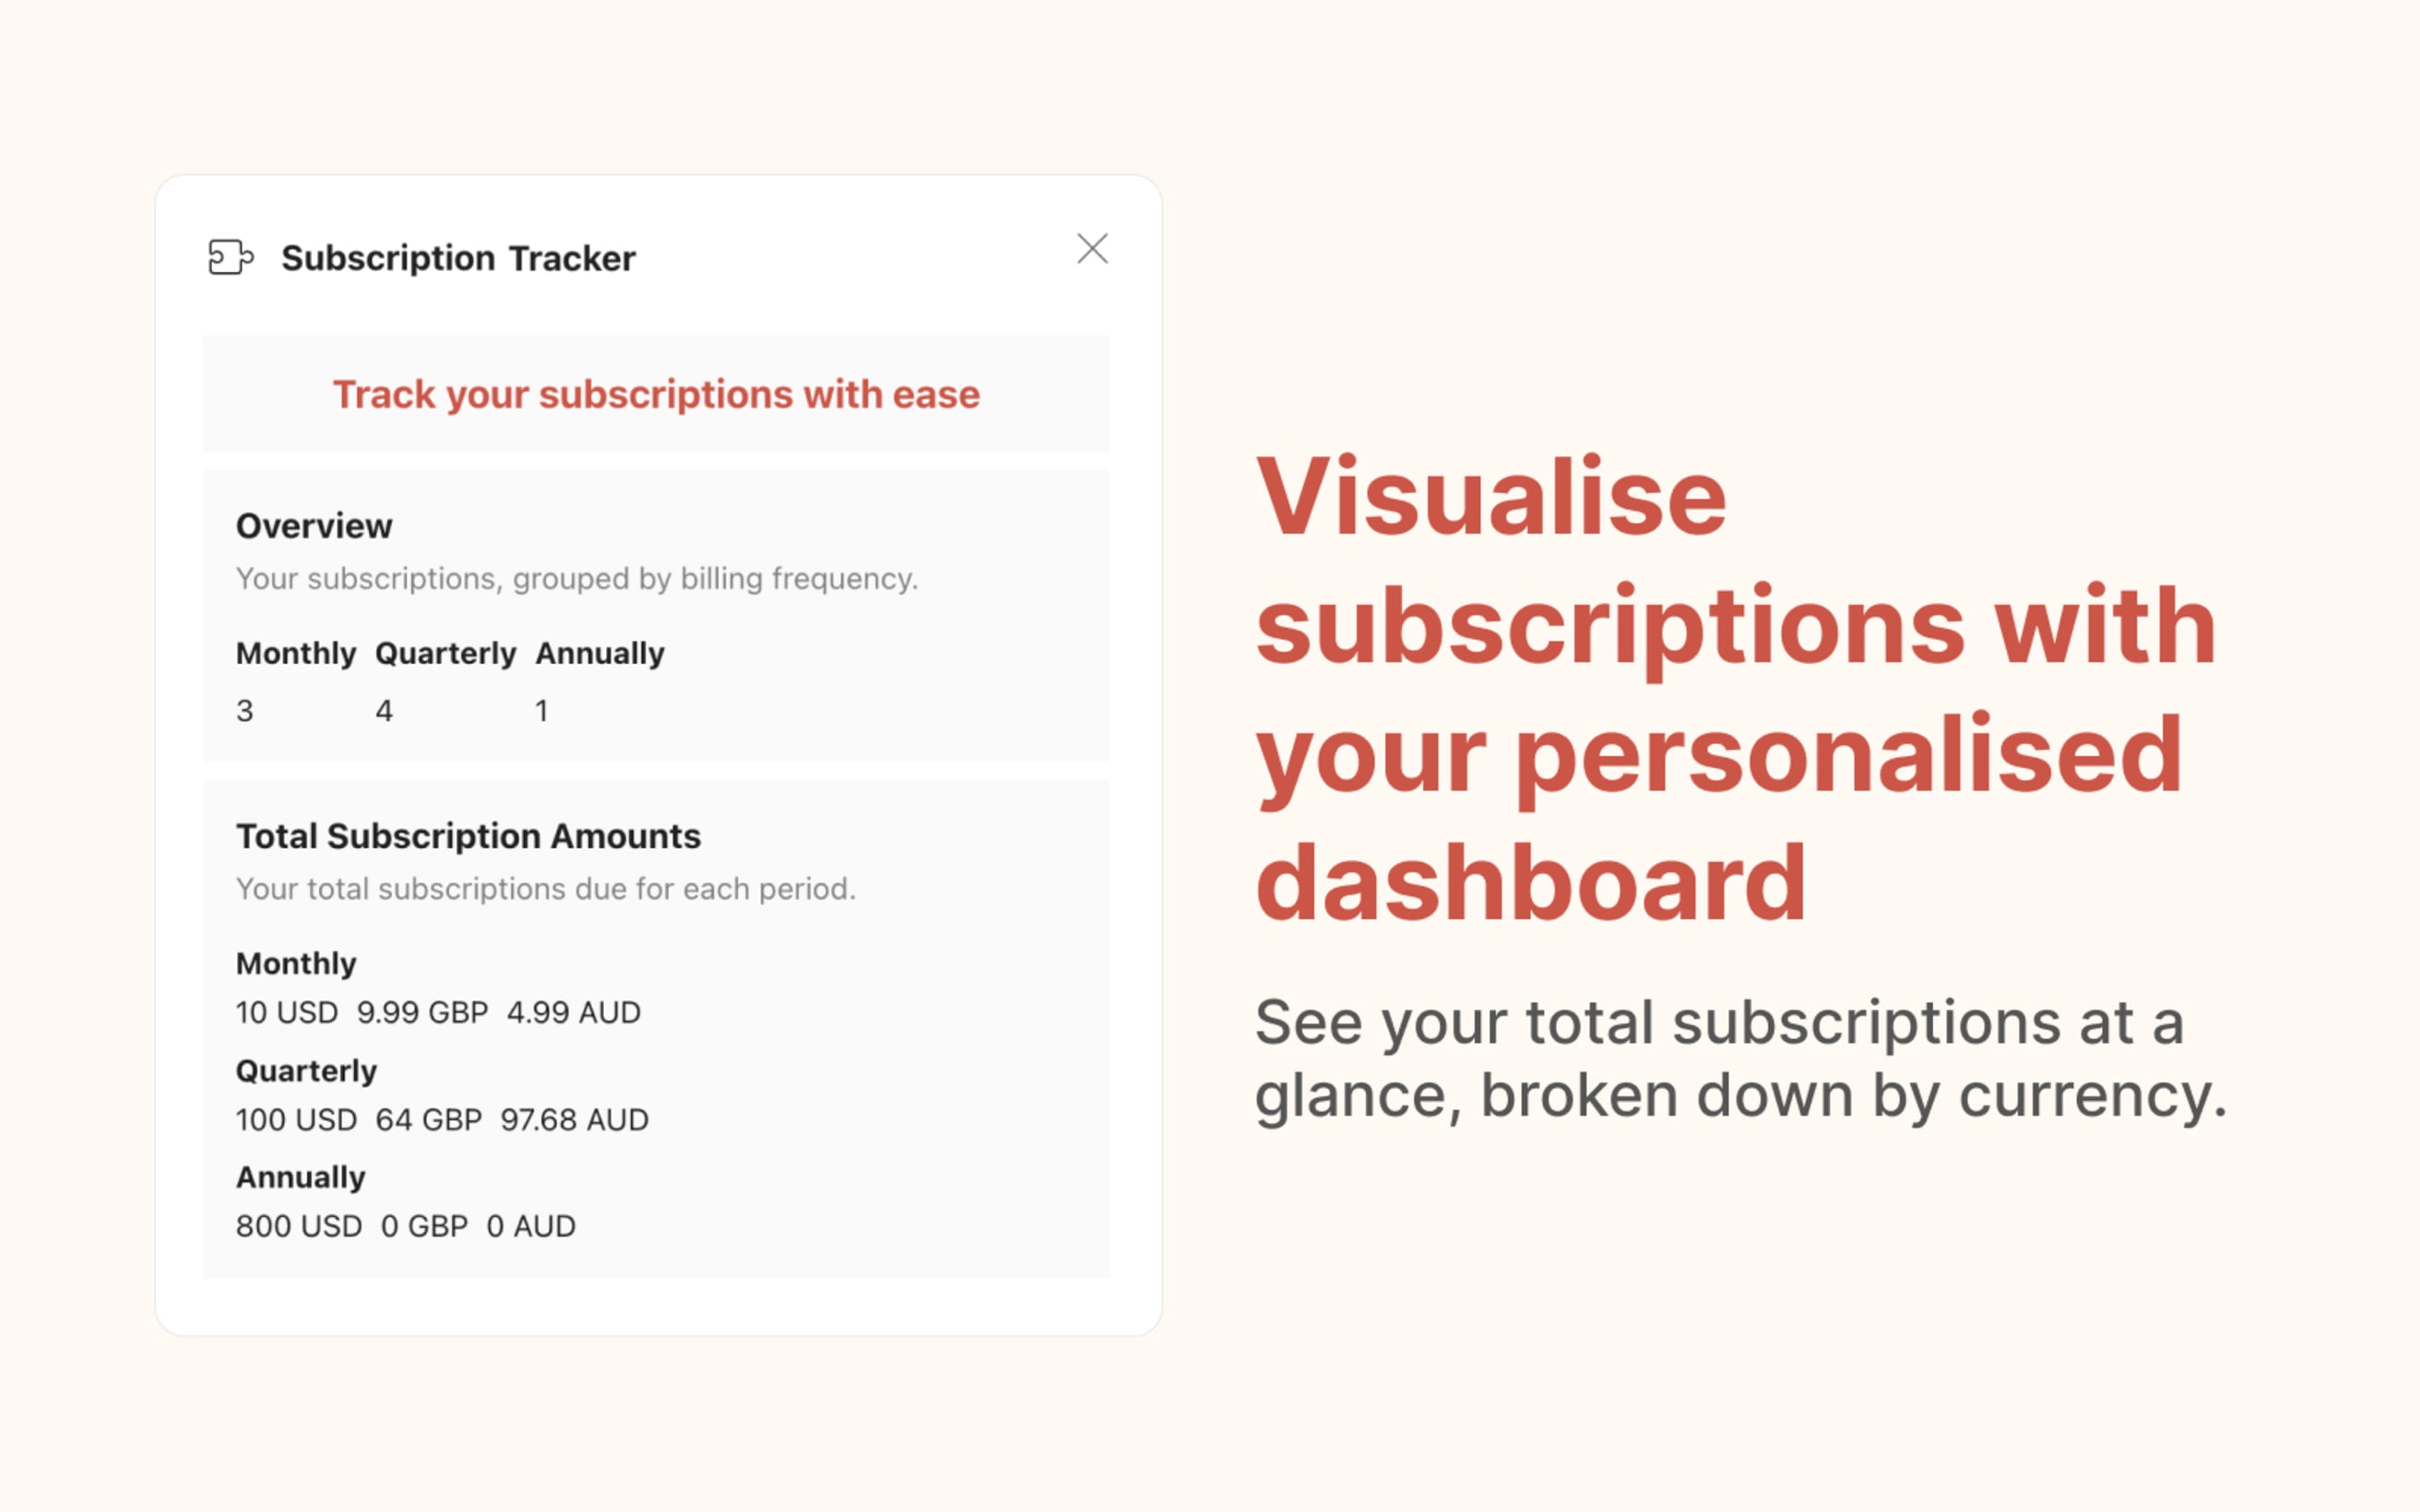 Visualize subscriptions with your personalized dashboard